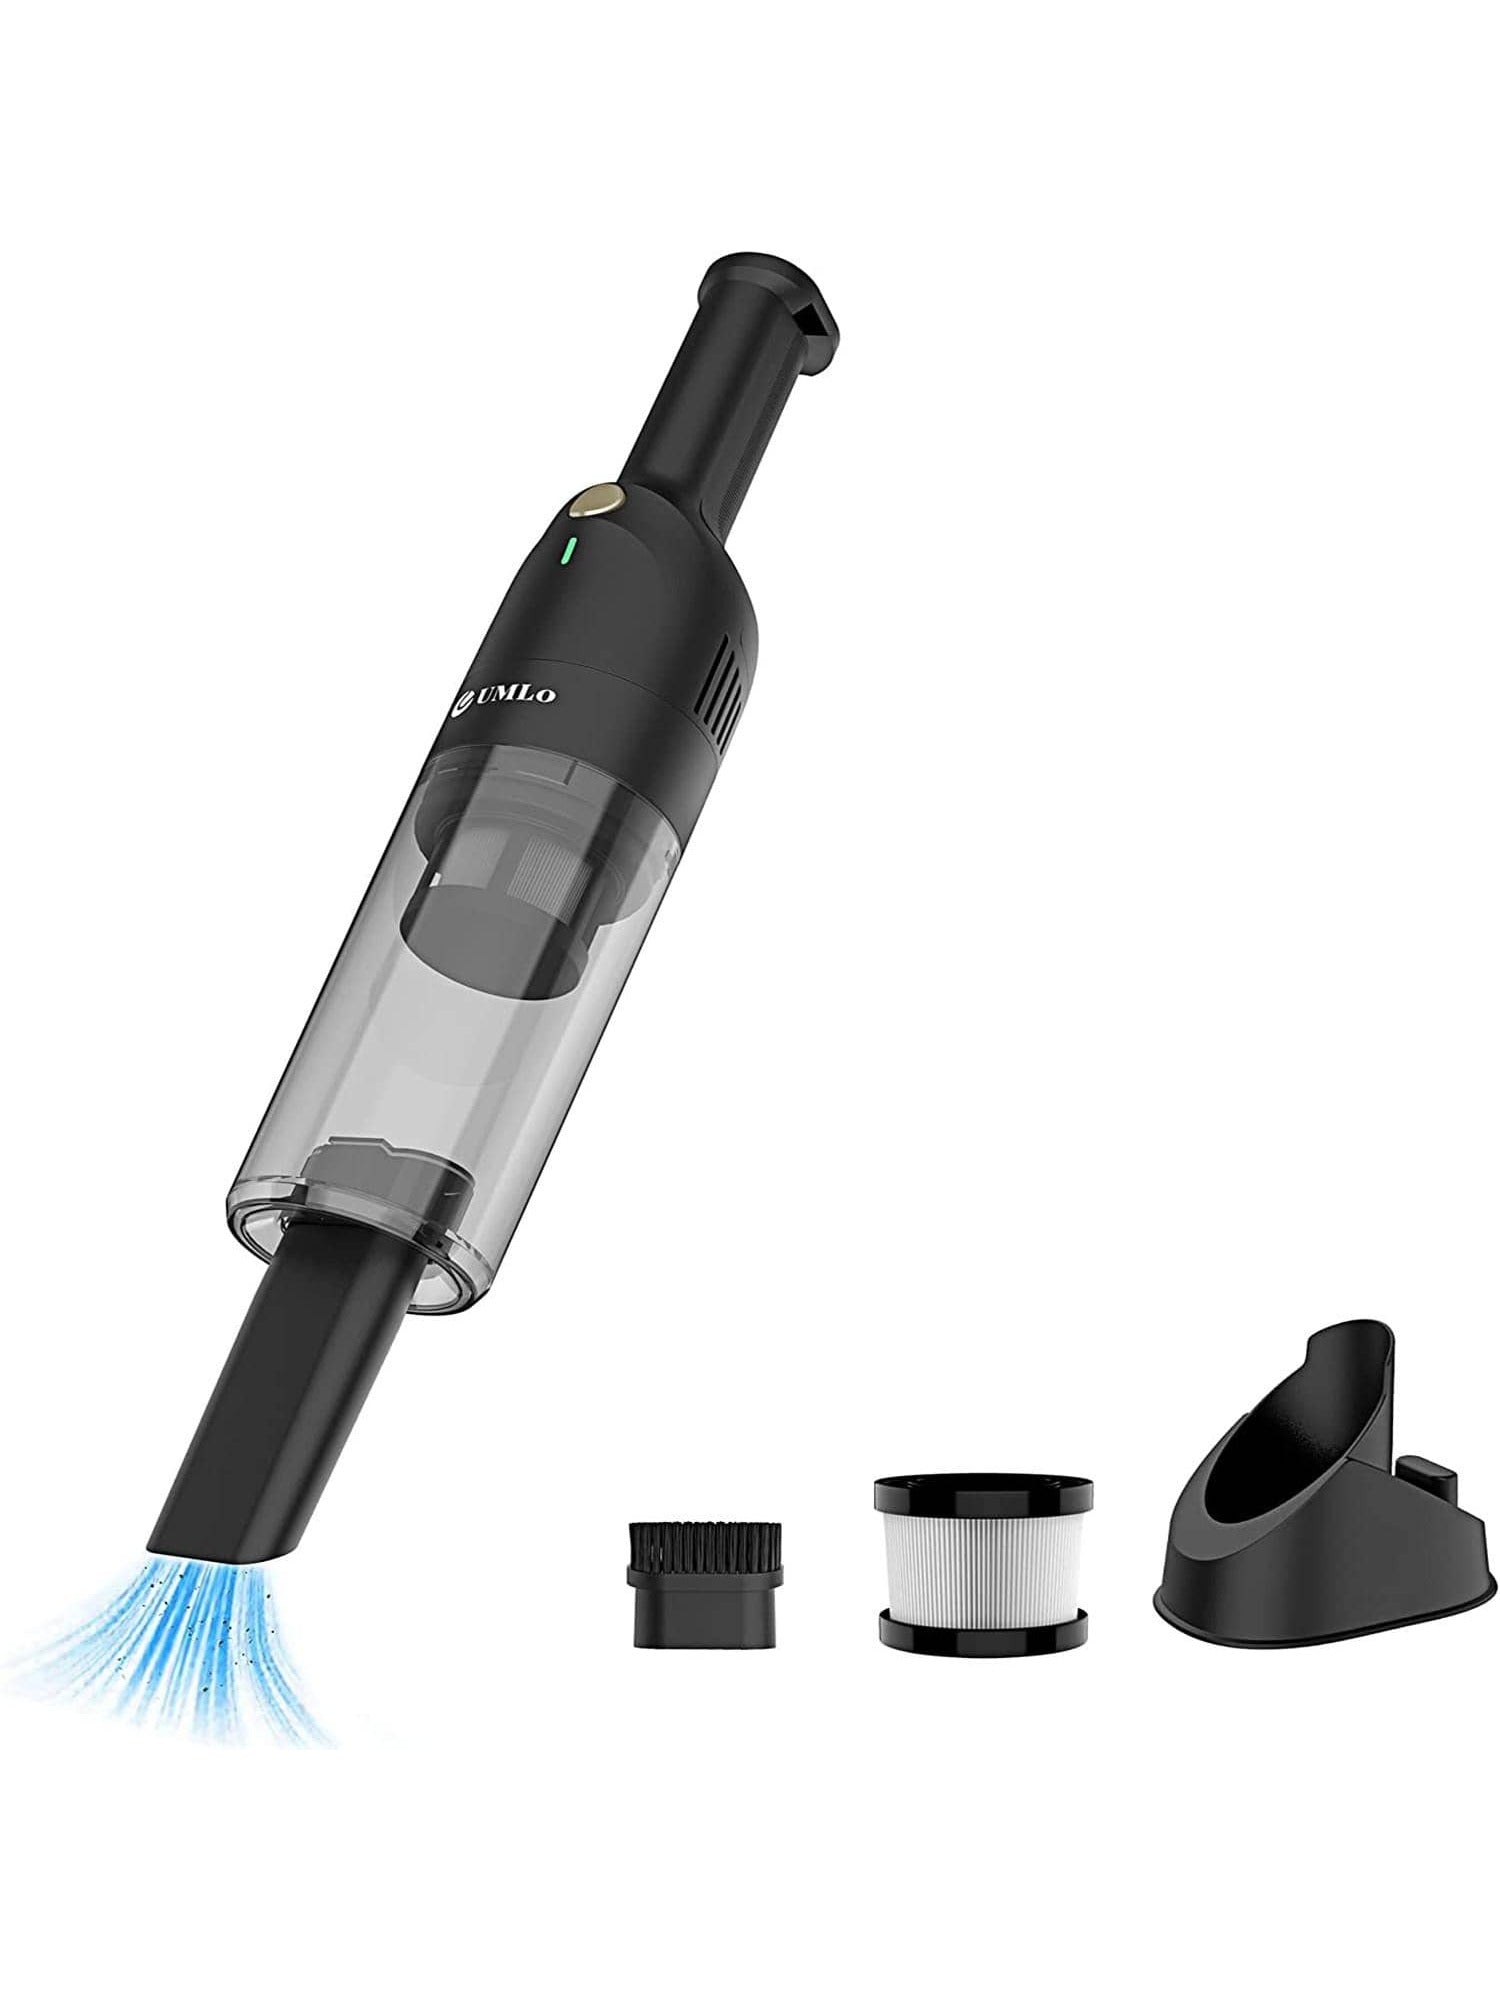 UMLo Handheld Vacuum Cleaner, Cordless Rechargeable Hand Vacuum with 30 Mins Runtime, Lightweight Powerful Car Vacuum Cleaner with 2 Power Modes, 500ML Dustbin for Home Car Office Quick Cleanups